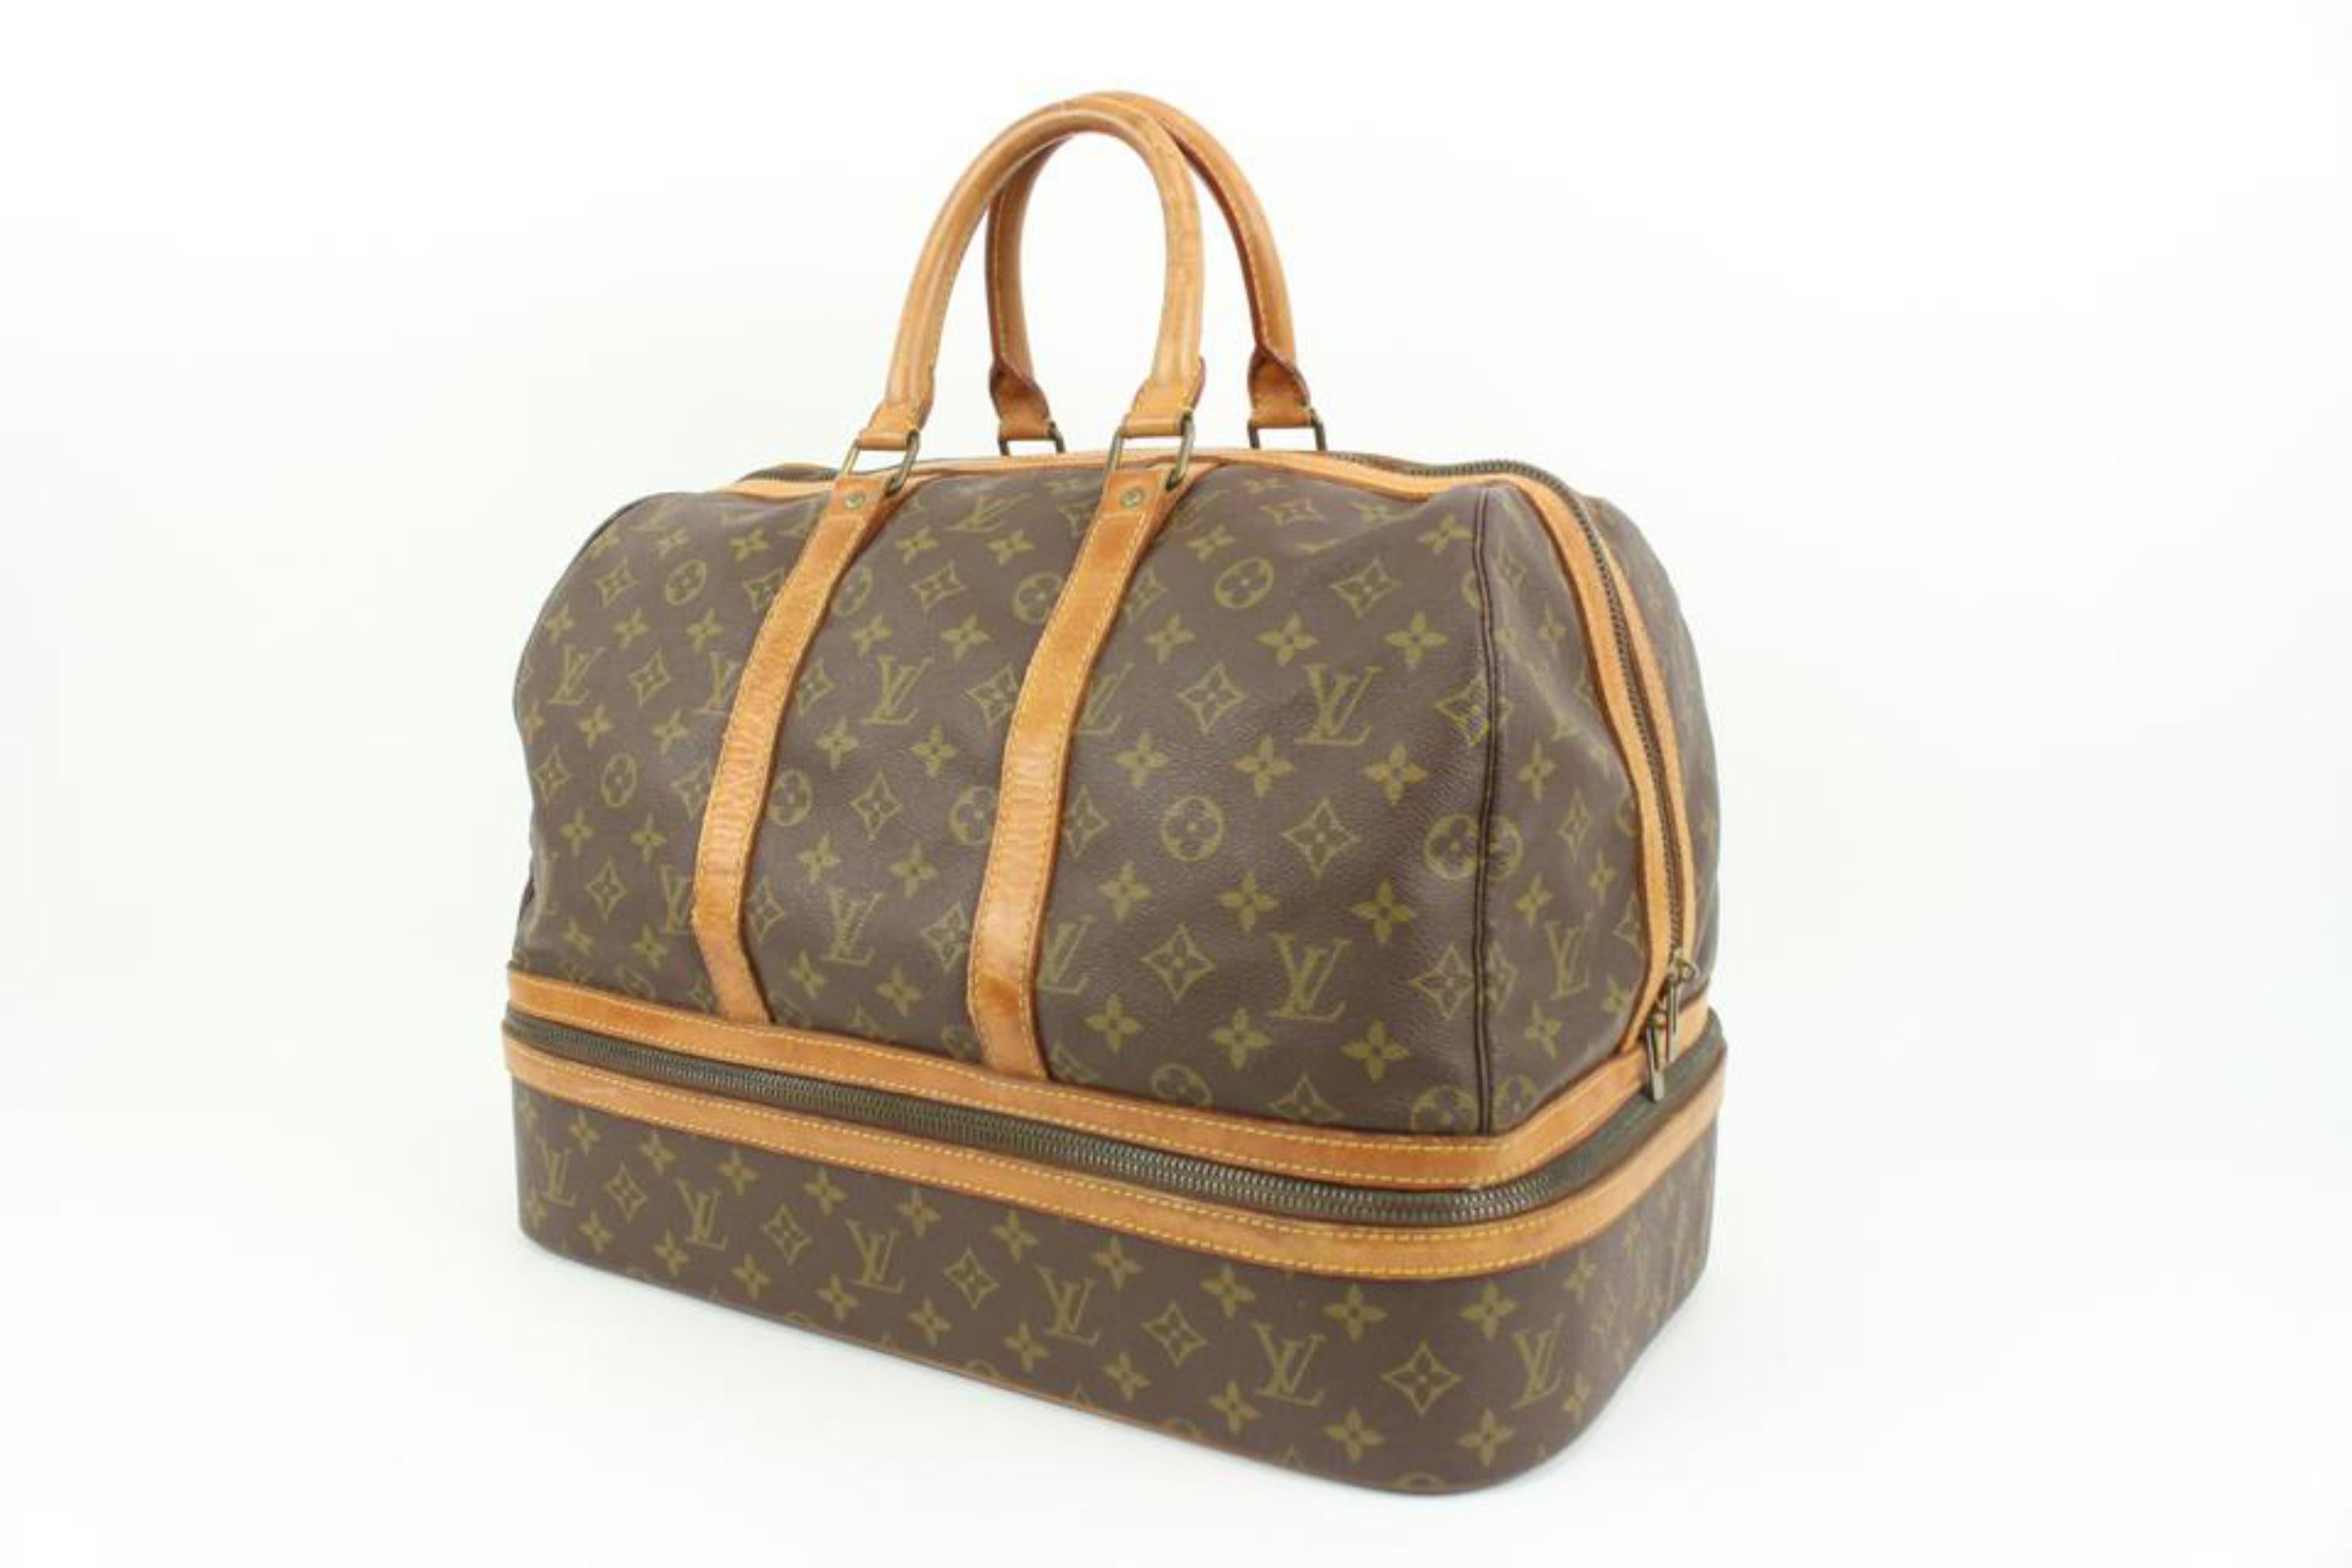 Louis Vuitton Monogram Sac Sport Shoe Trunk Duffle Upcycle Ready 46lk41
Made In: France
Measurements: Length:  17.5